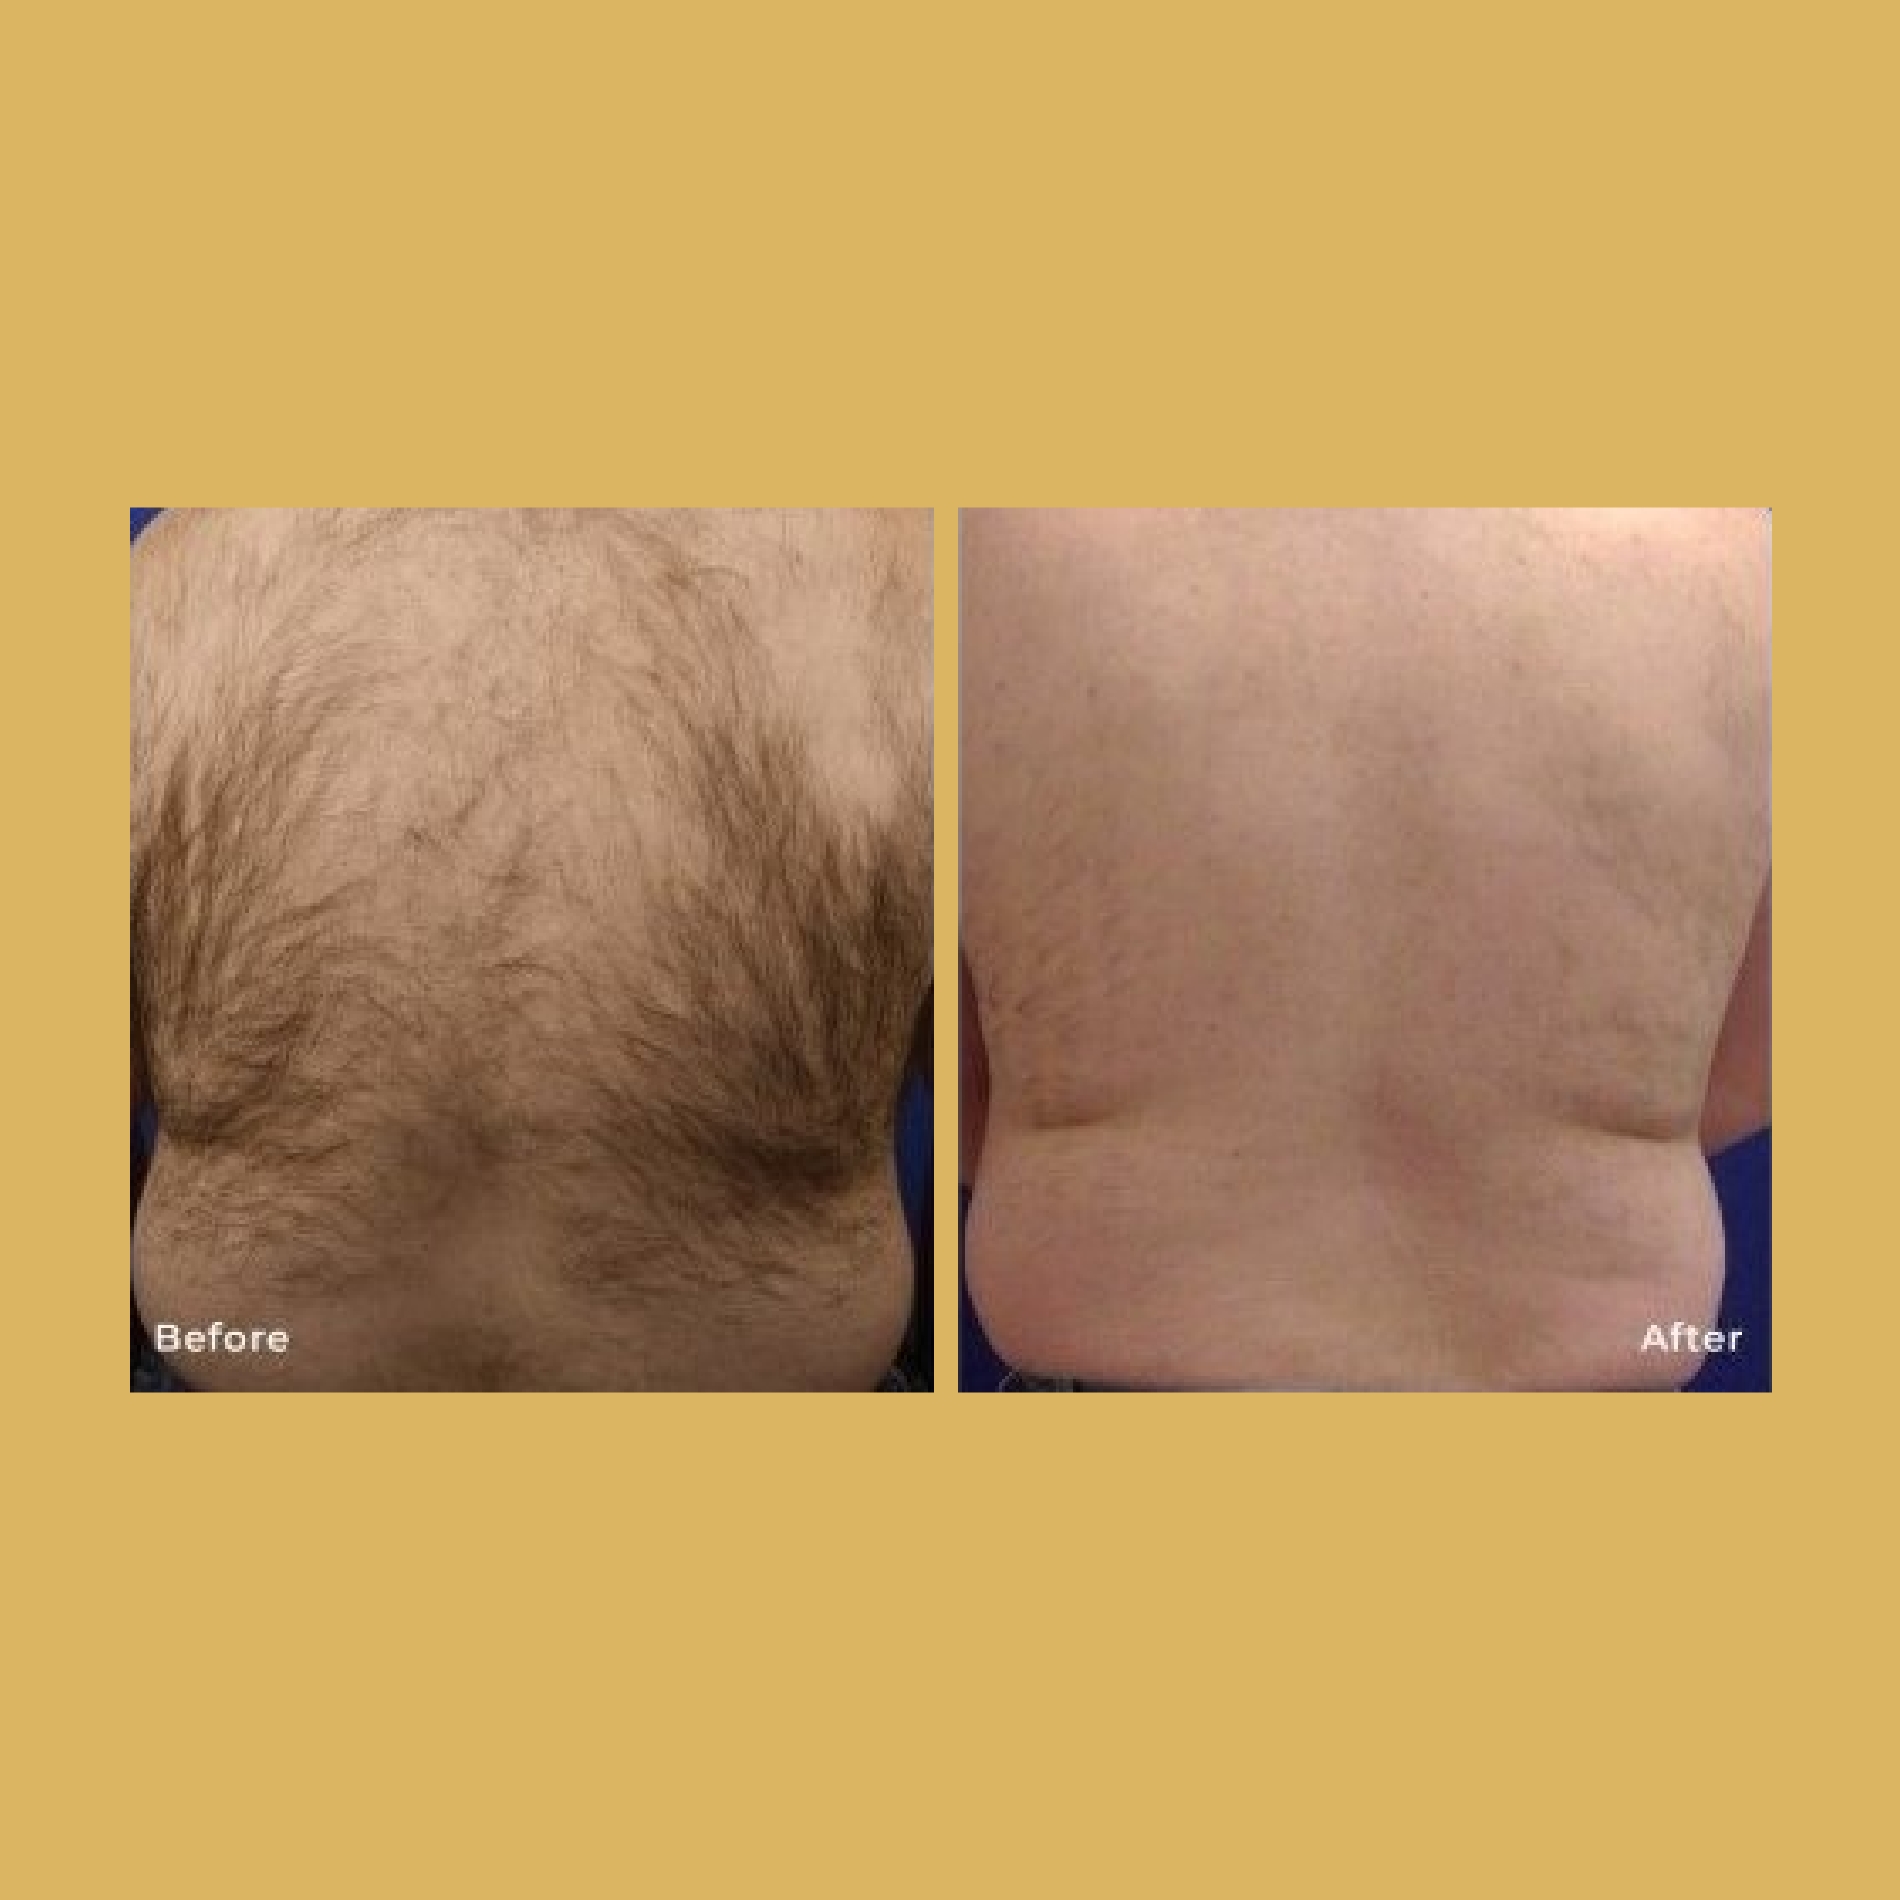 Male Laser Hair Removal Before and After Photos | Soleil Medical & Beauty Spa in Portland, OR